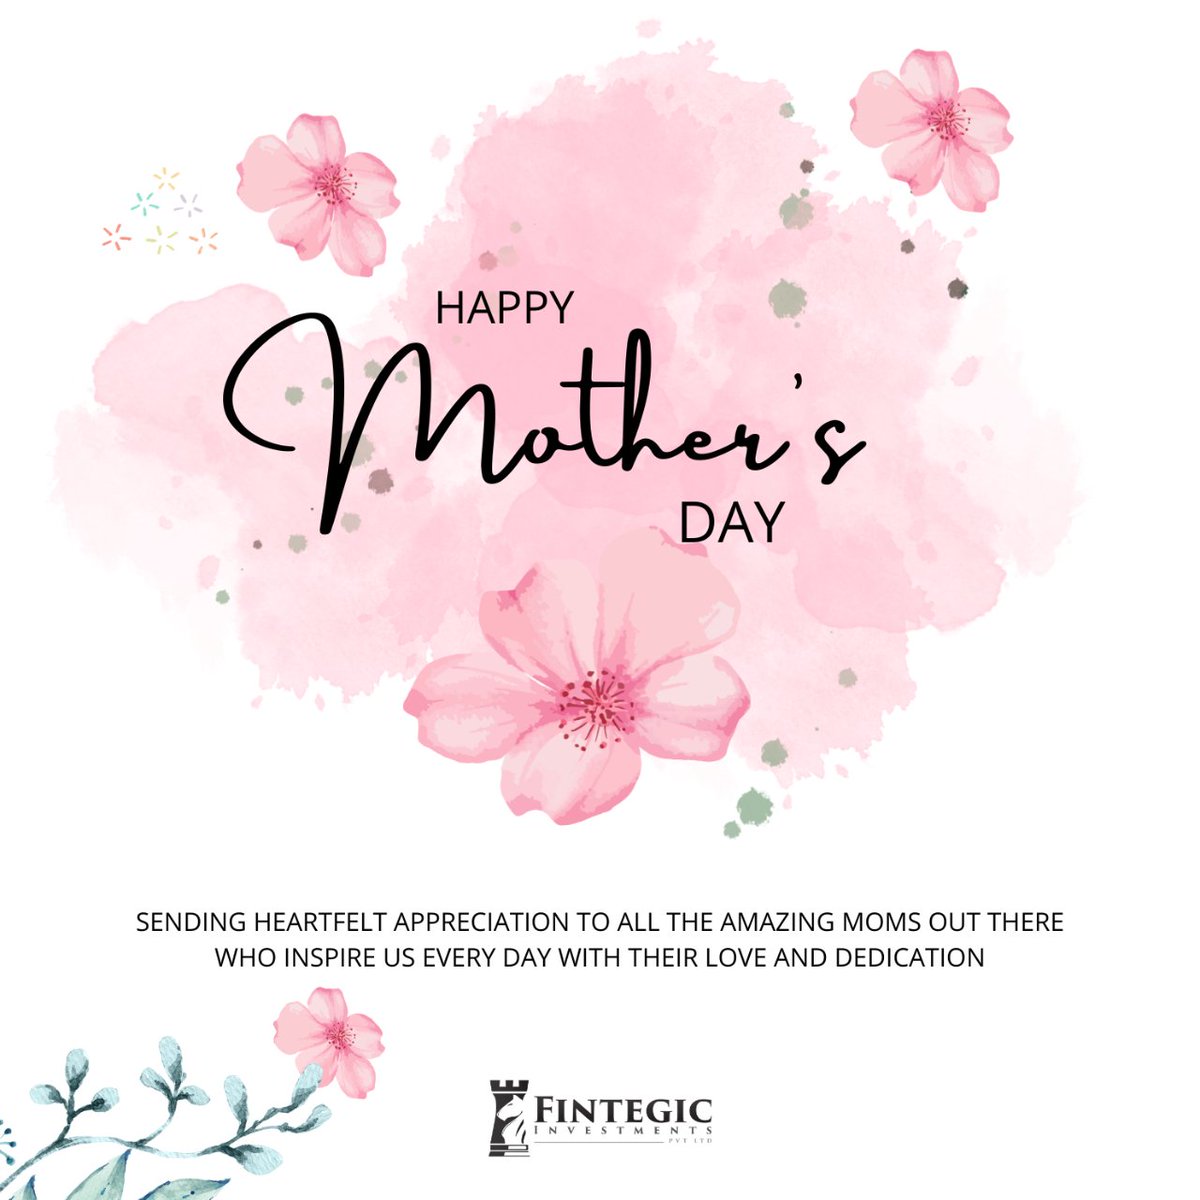 Sending heartfelt appreciation to all the amazing moms out there who inspire us every day with their love and dedication

Happy Mother's Day!

#fintegicinvestments #fintegic #happymothersday #mothersday2024 #mothersday #maldives #resortlife #sunnysideoflife